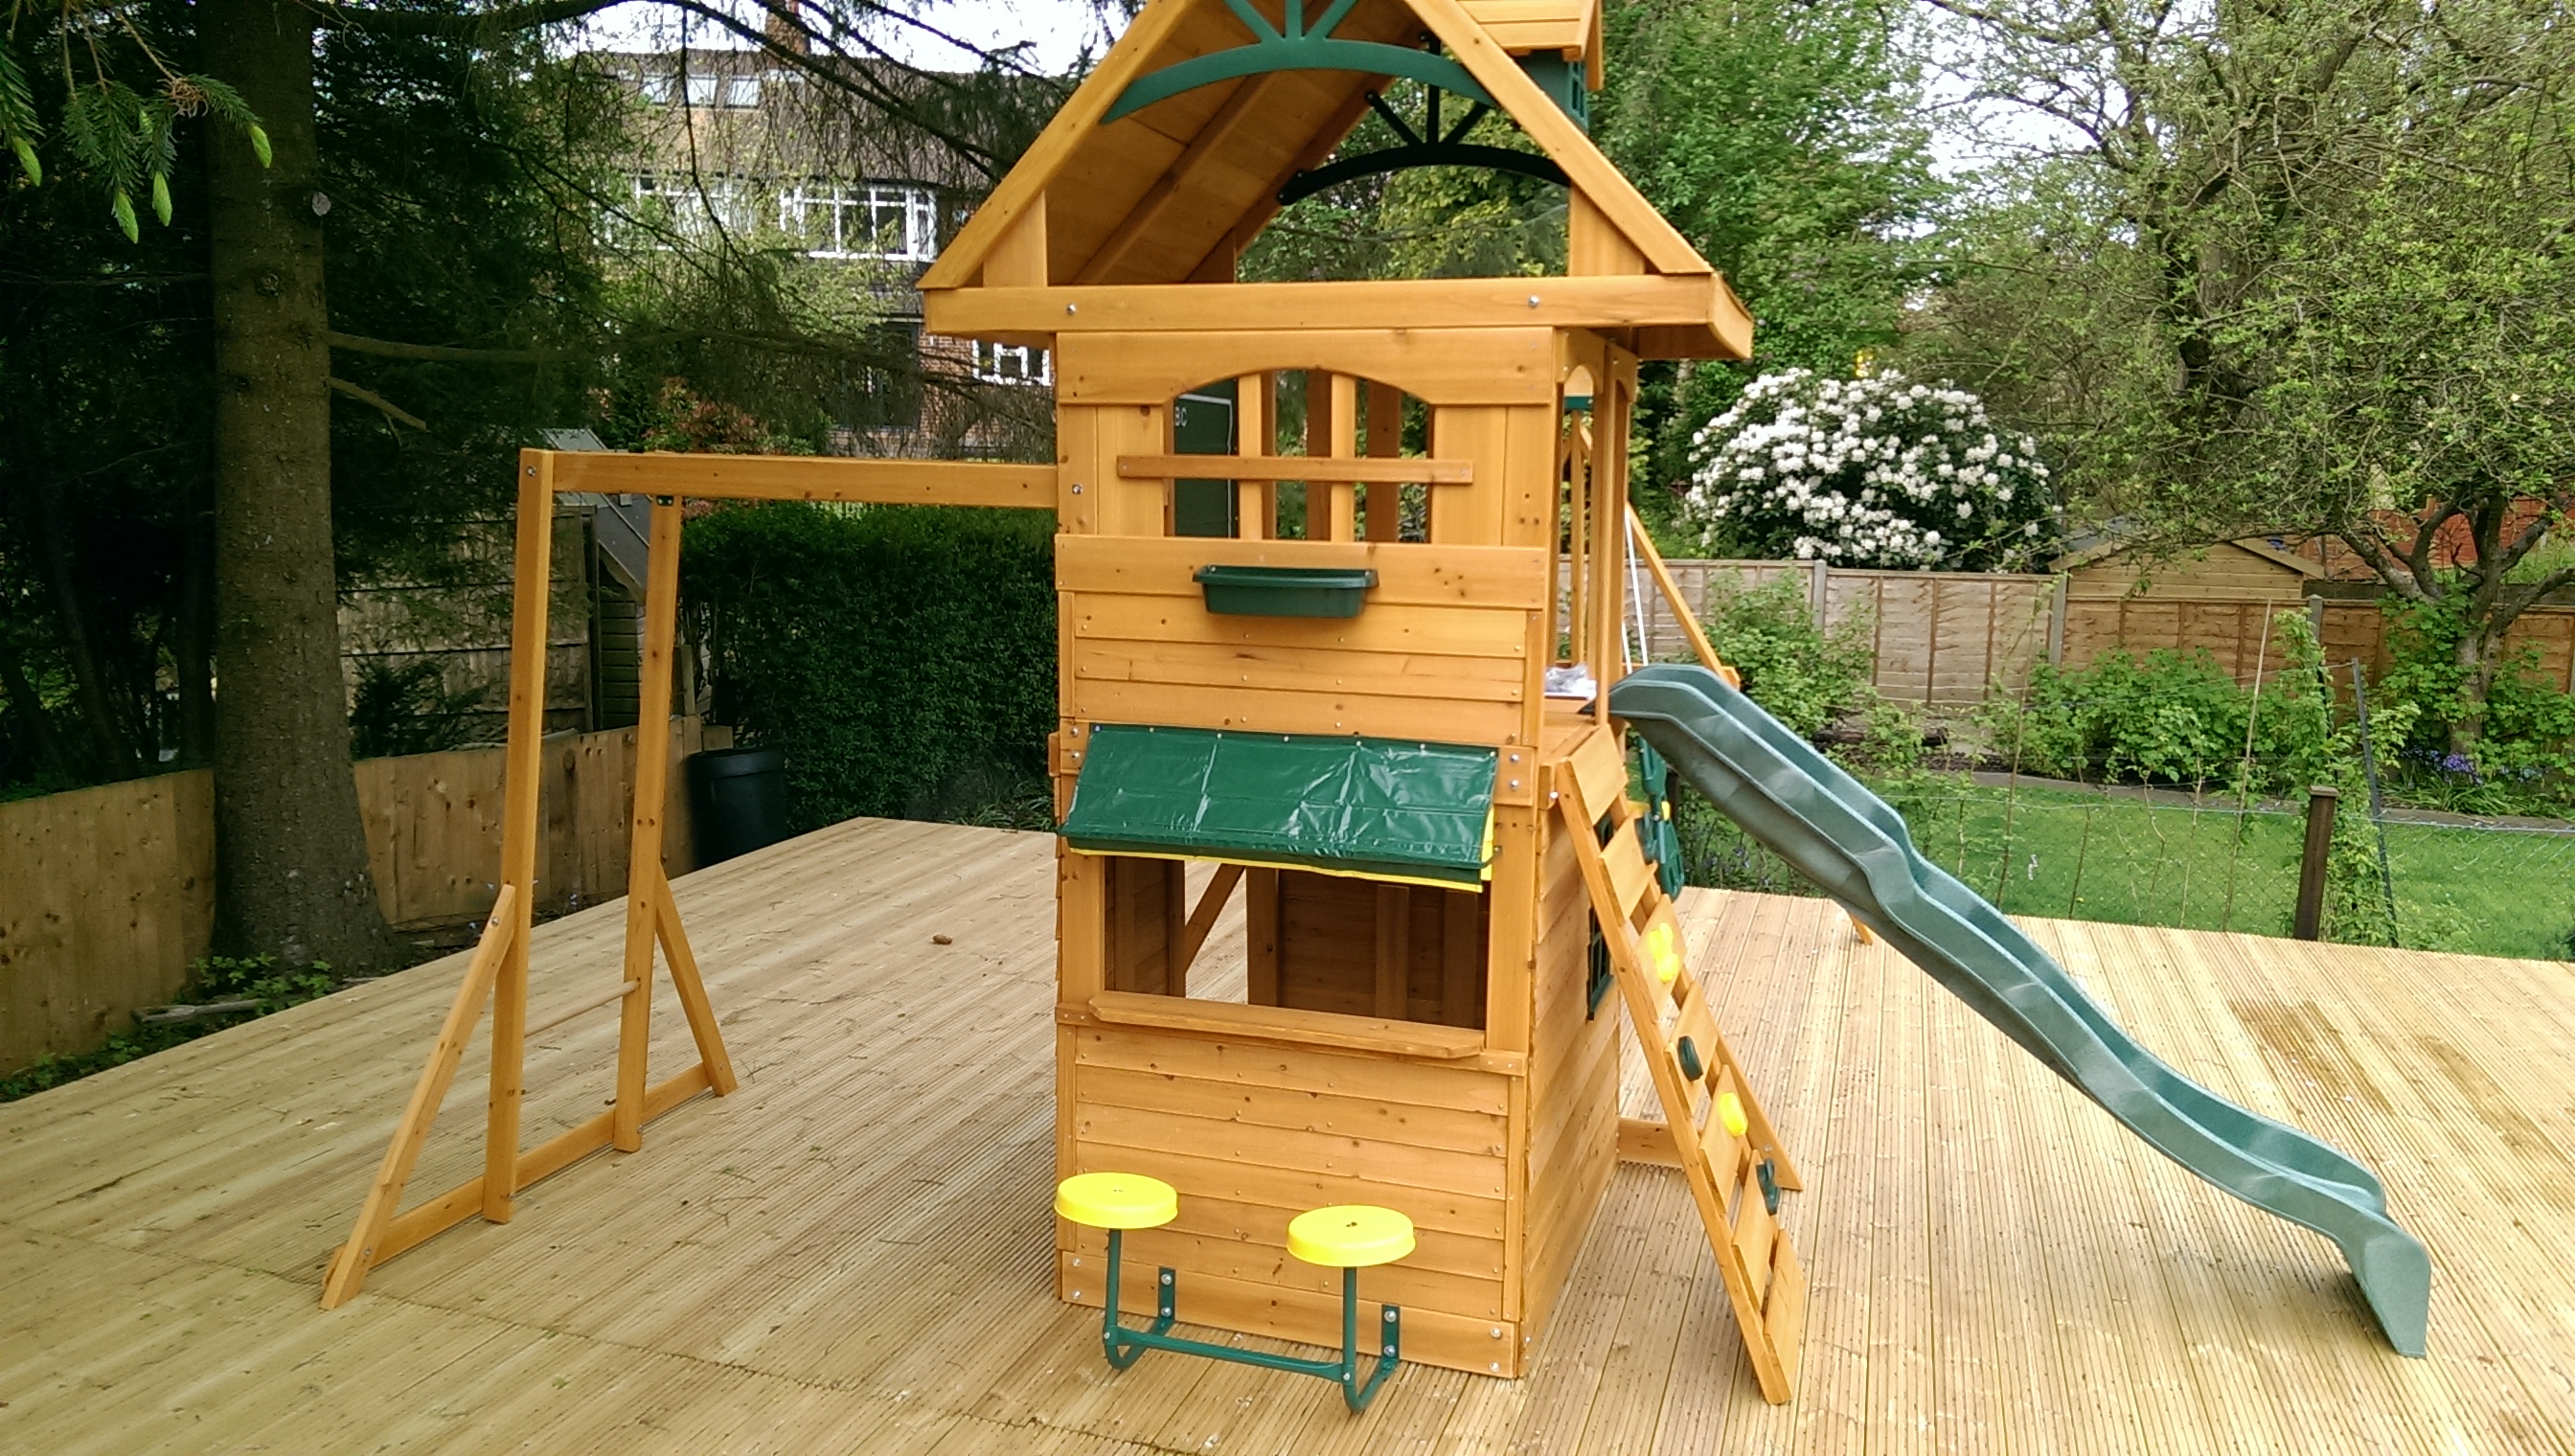 The Selwood Ridgeview Deluxe Play Frame